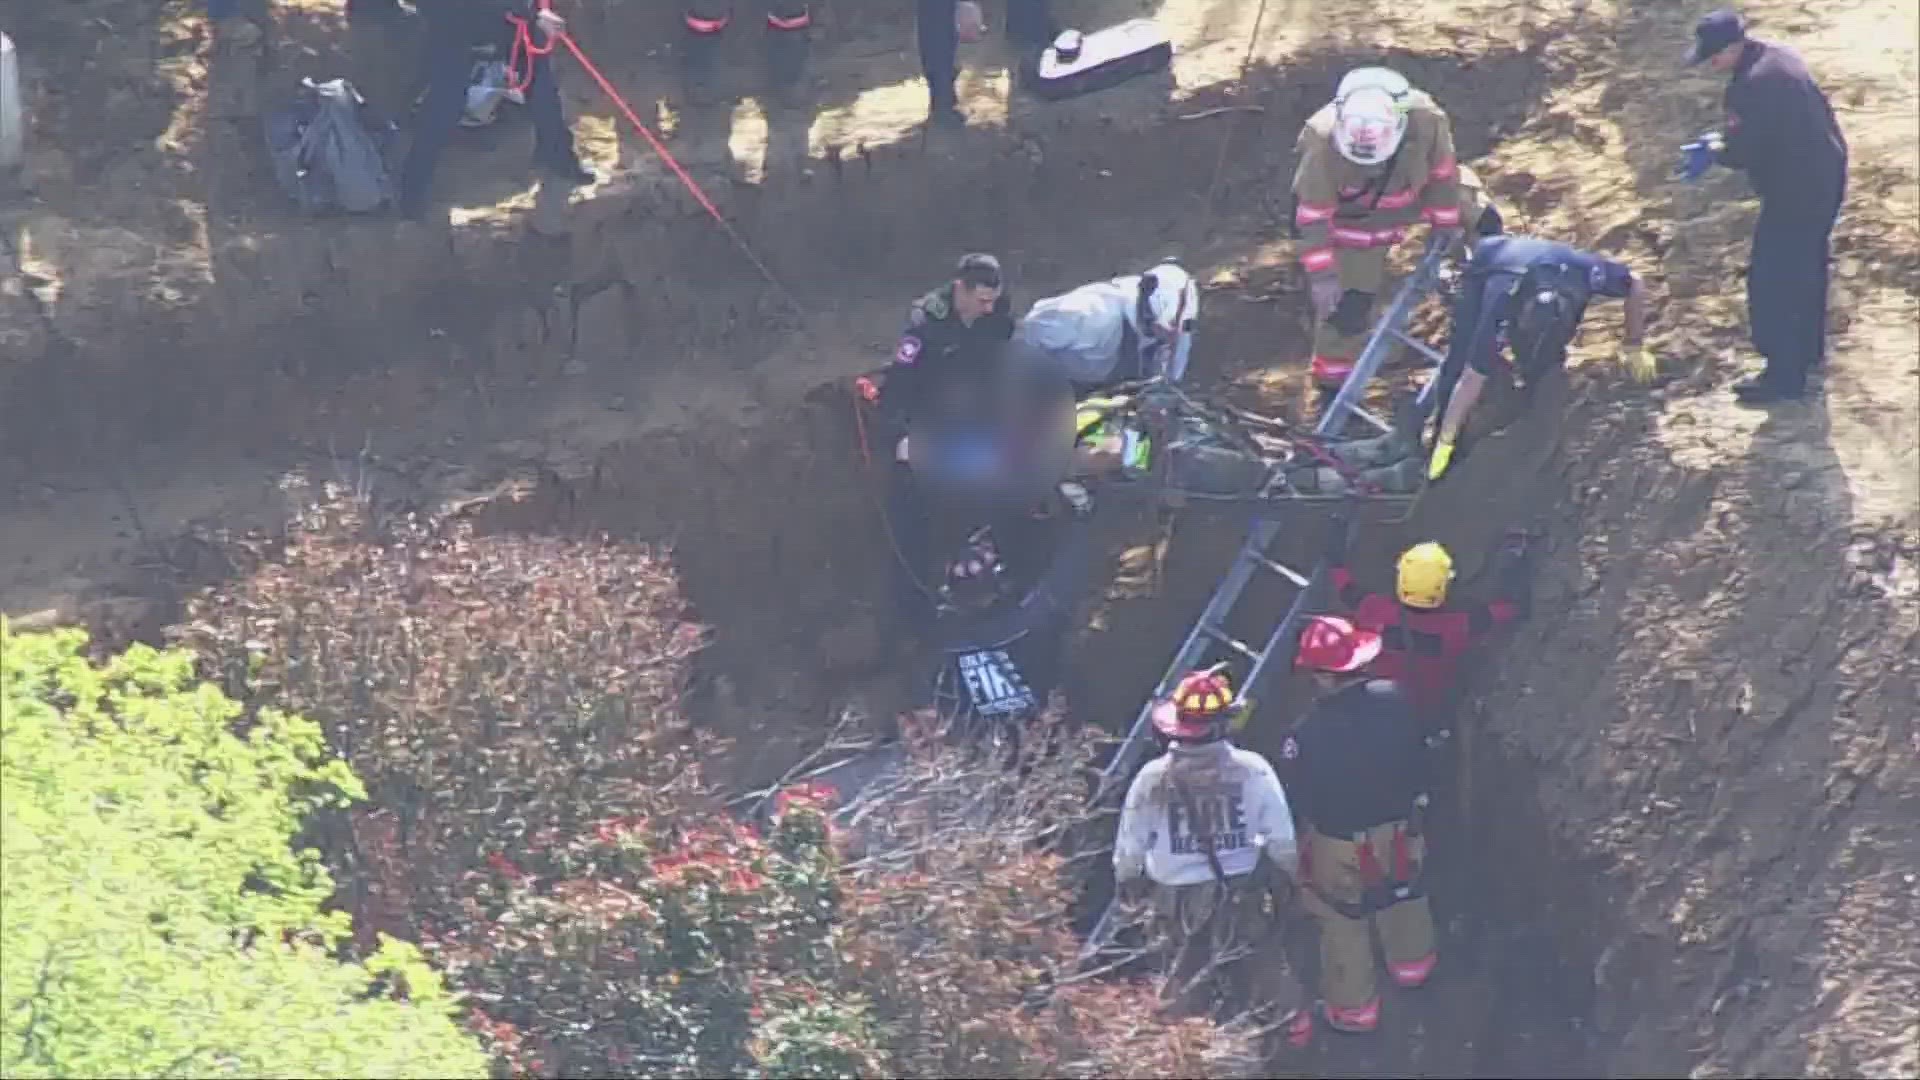 The department told WFAA that a man was inside a pipe that washed away.